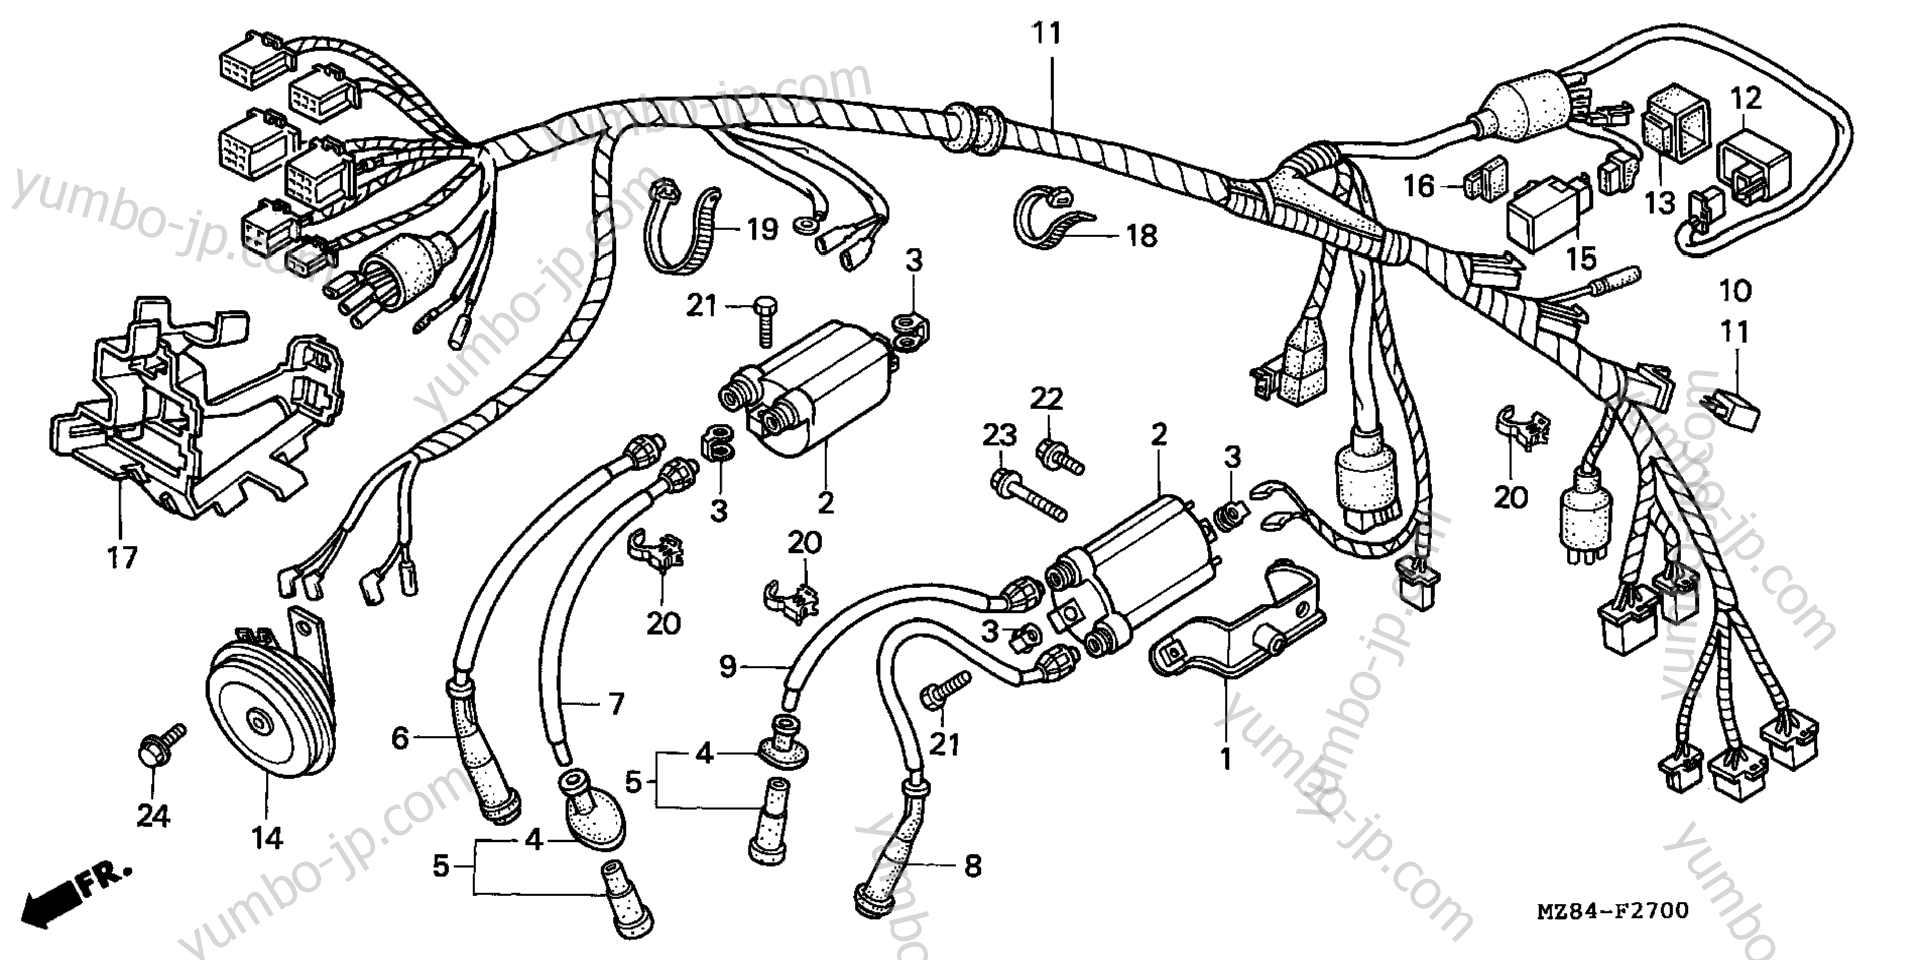 WIRE HARNESS for motorcycles HONDA VT600CD A 1997 year